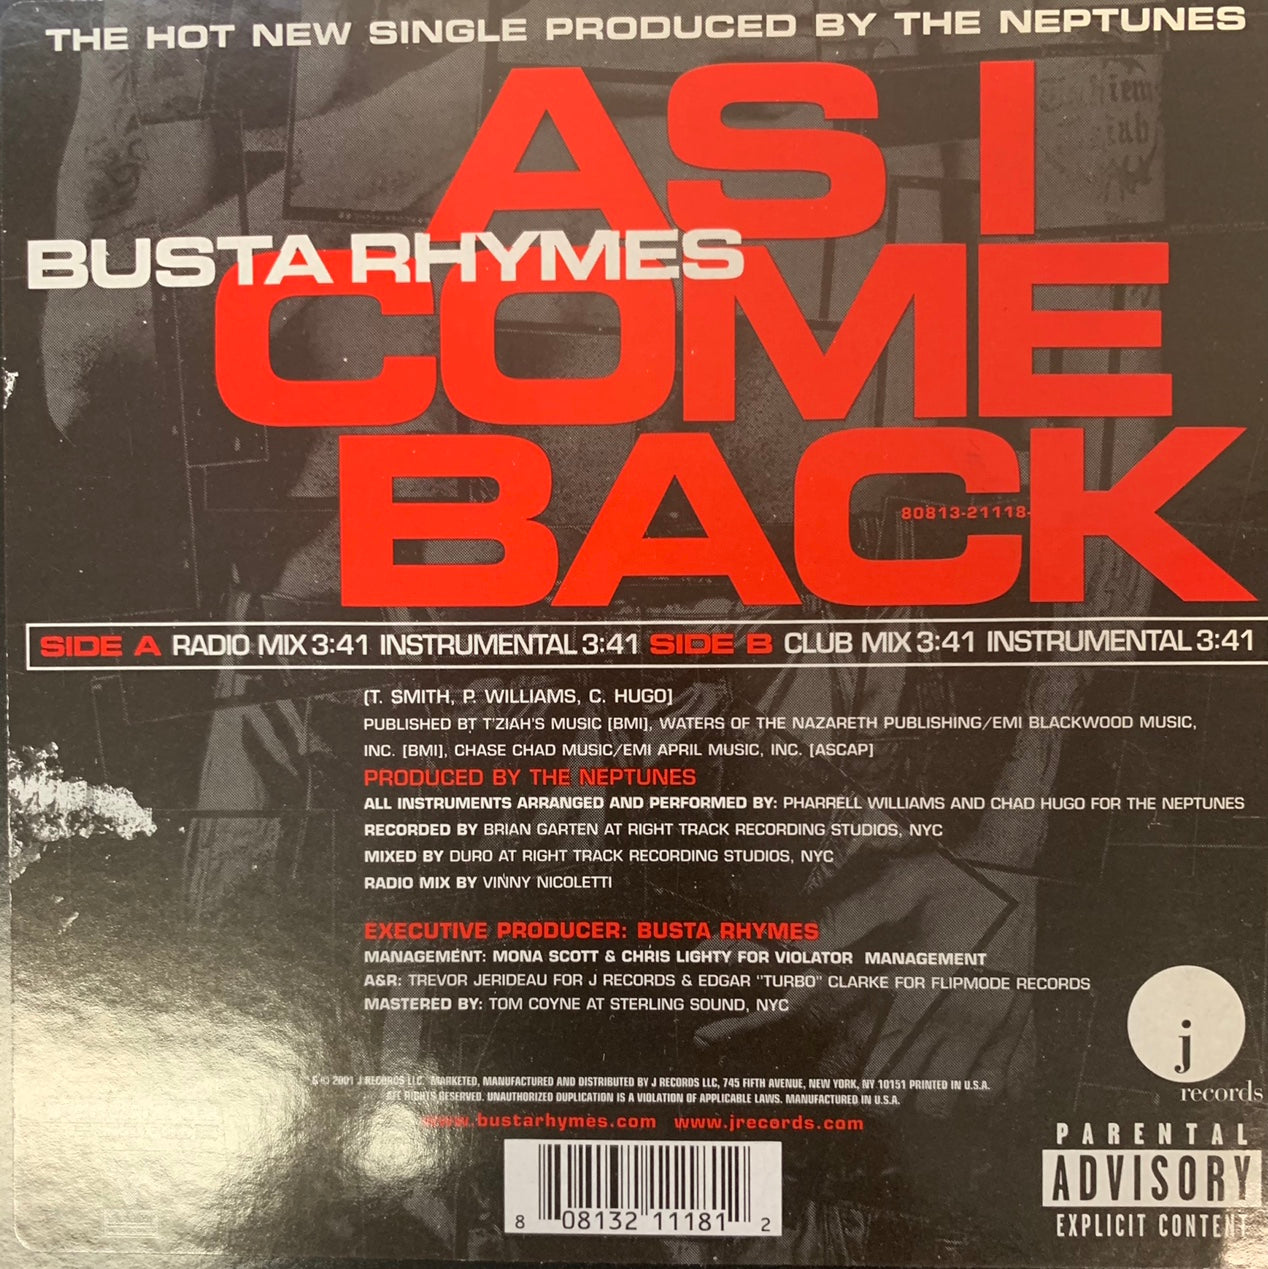 Busta Rhymes “As I Come Back” 4 Track 12inch Vinyl.